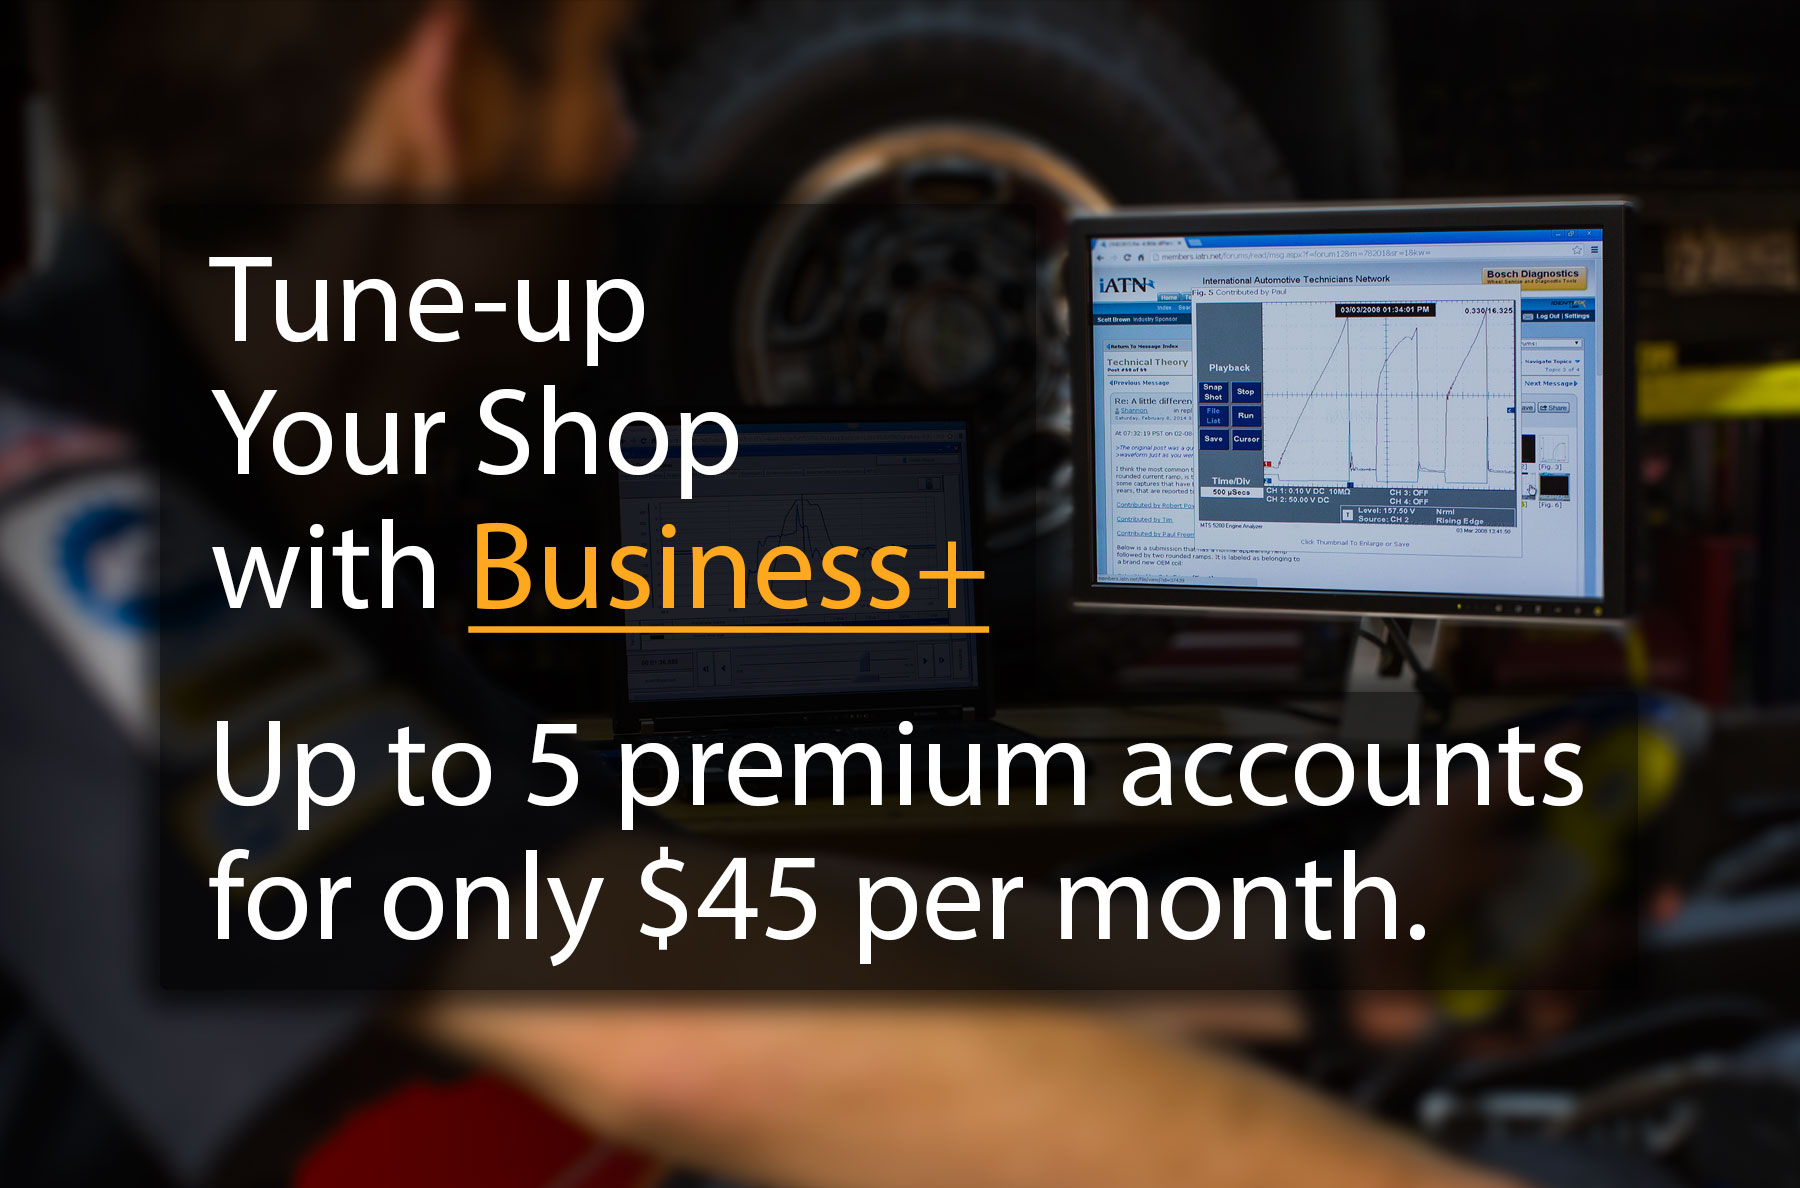 Tune-up your shop with Business+. Up to 5 premium accounts for only $45 per month.